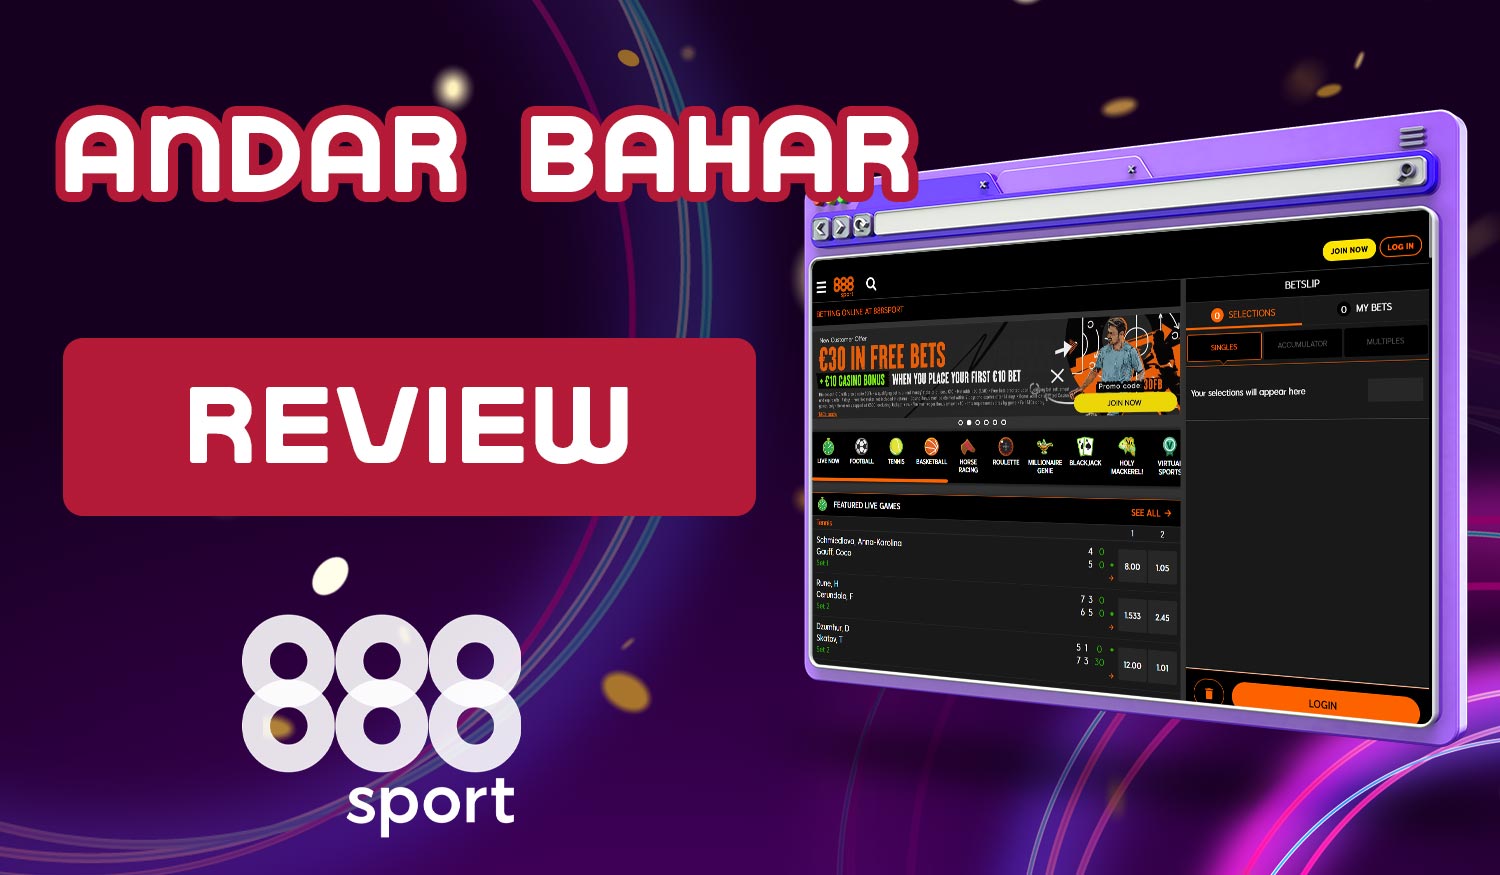 Detailed 888Sport review dedicated to the game Andar Bahar on the website